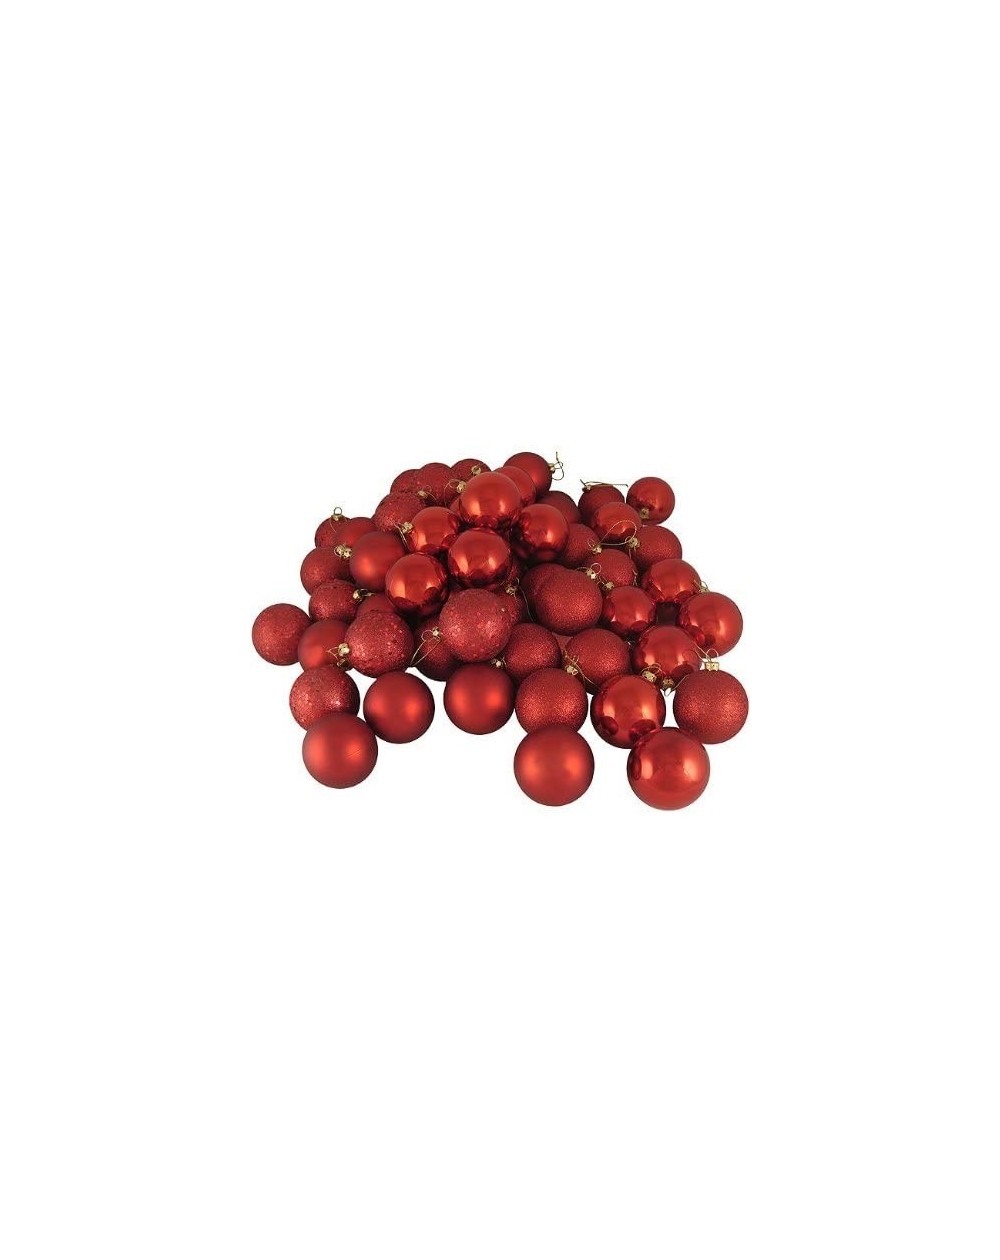 Ornaments 21ct Matte Red Hot Shatterproof Christmas Ball Ornaments 1.56" (39mm) (Red) - Red - CX129Q92D07 $11.12